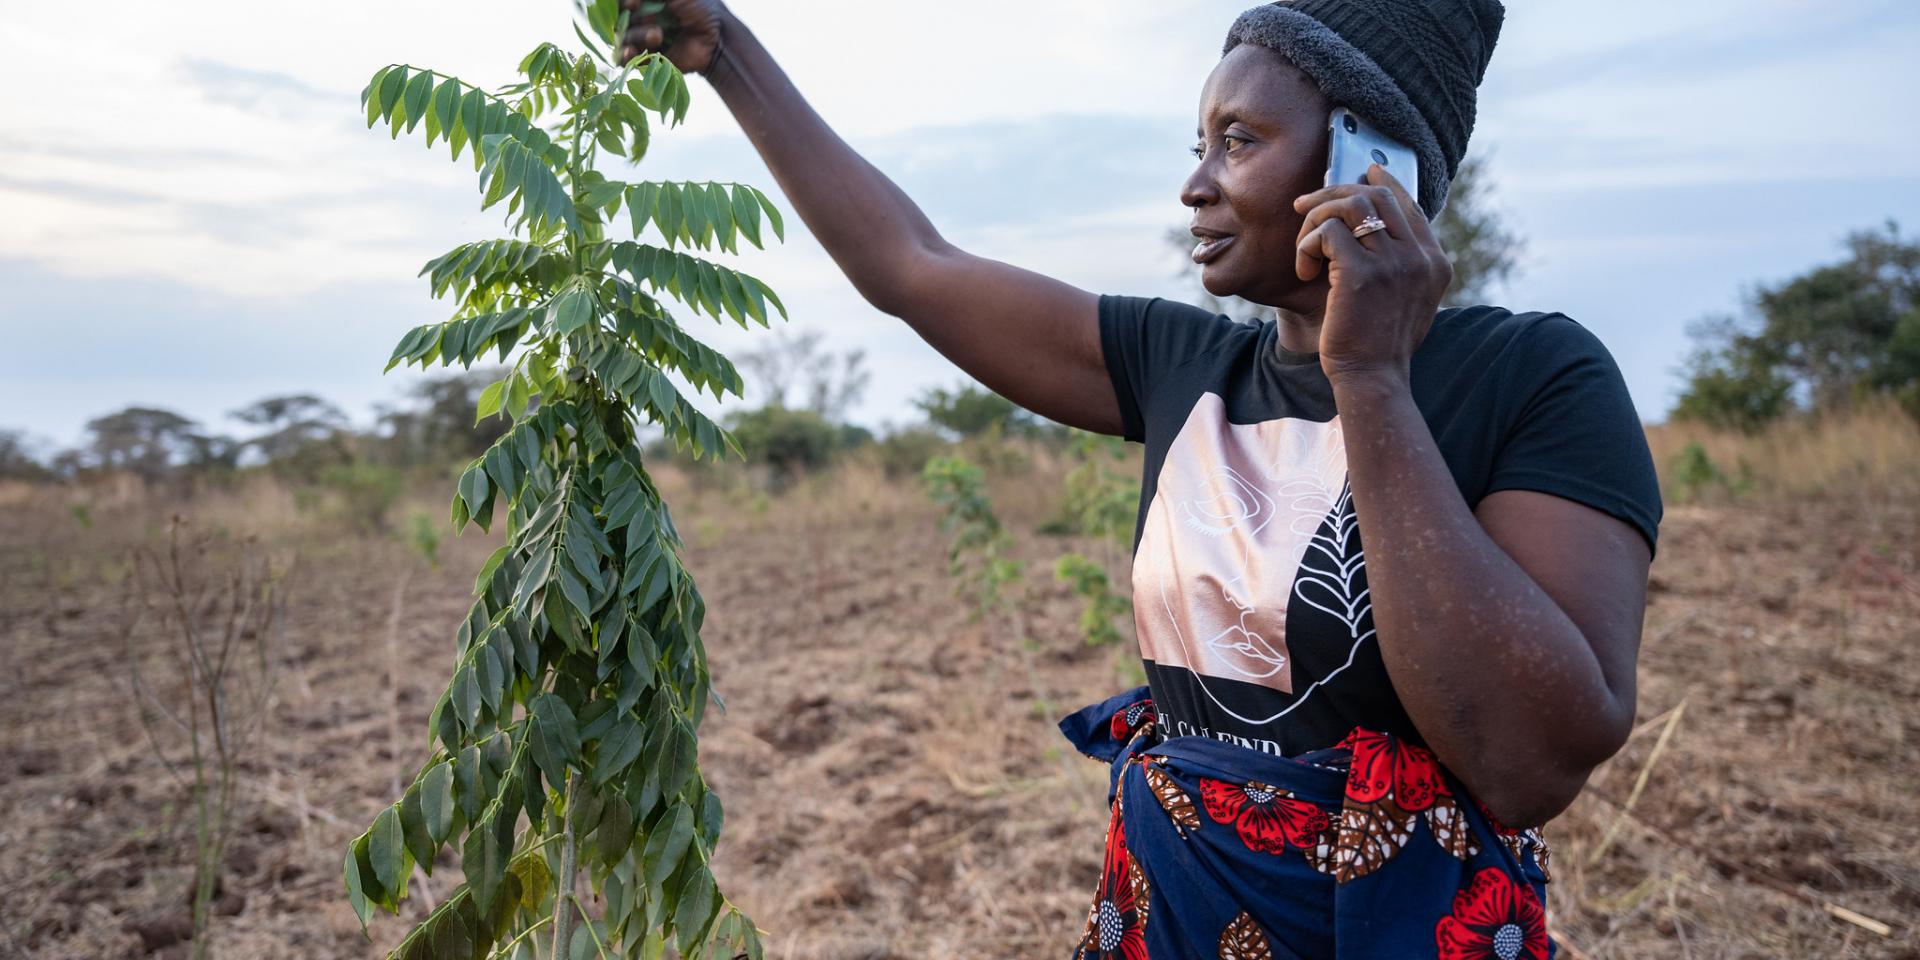 Women farmer talking in cell phone, standing in field next to tall plant